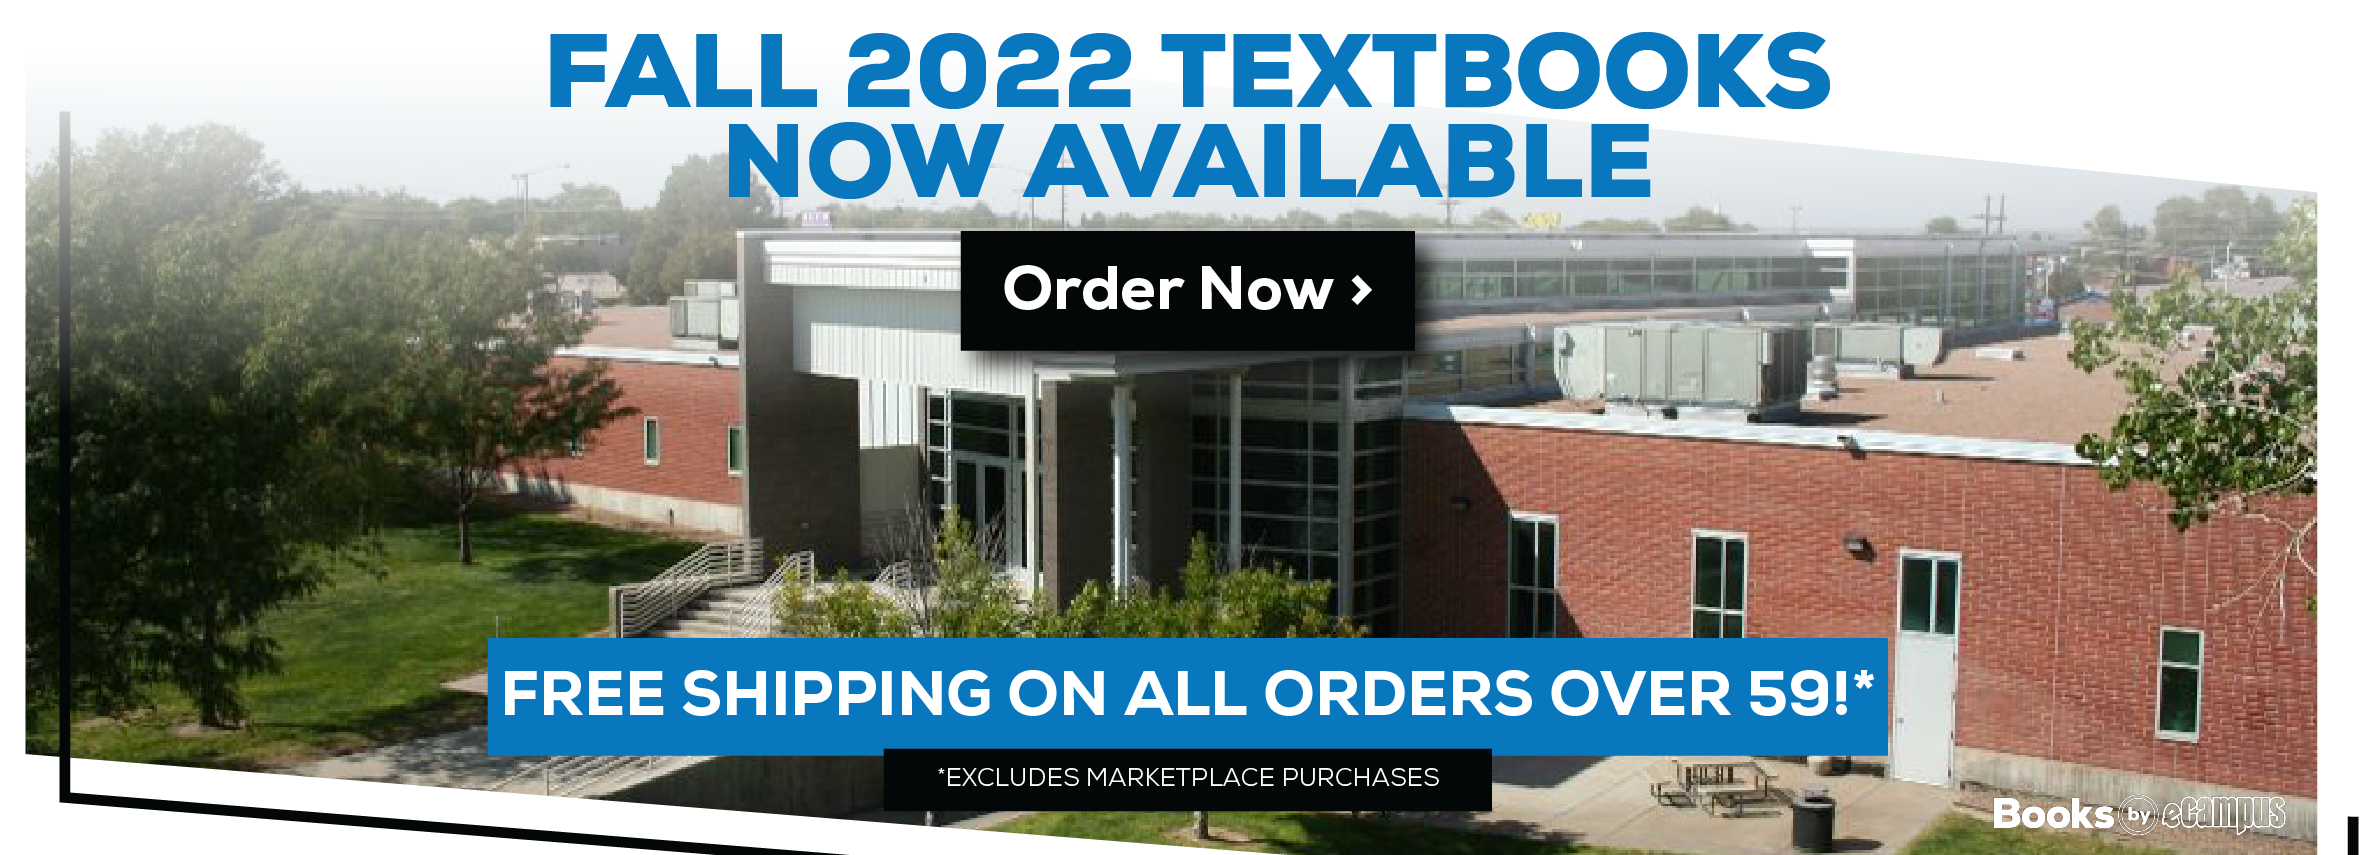 Fall 2022 Textbooks Now available. Order Now. Free shipping on all orders over $59!